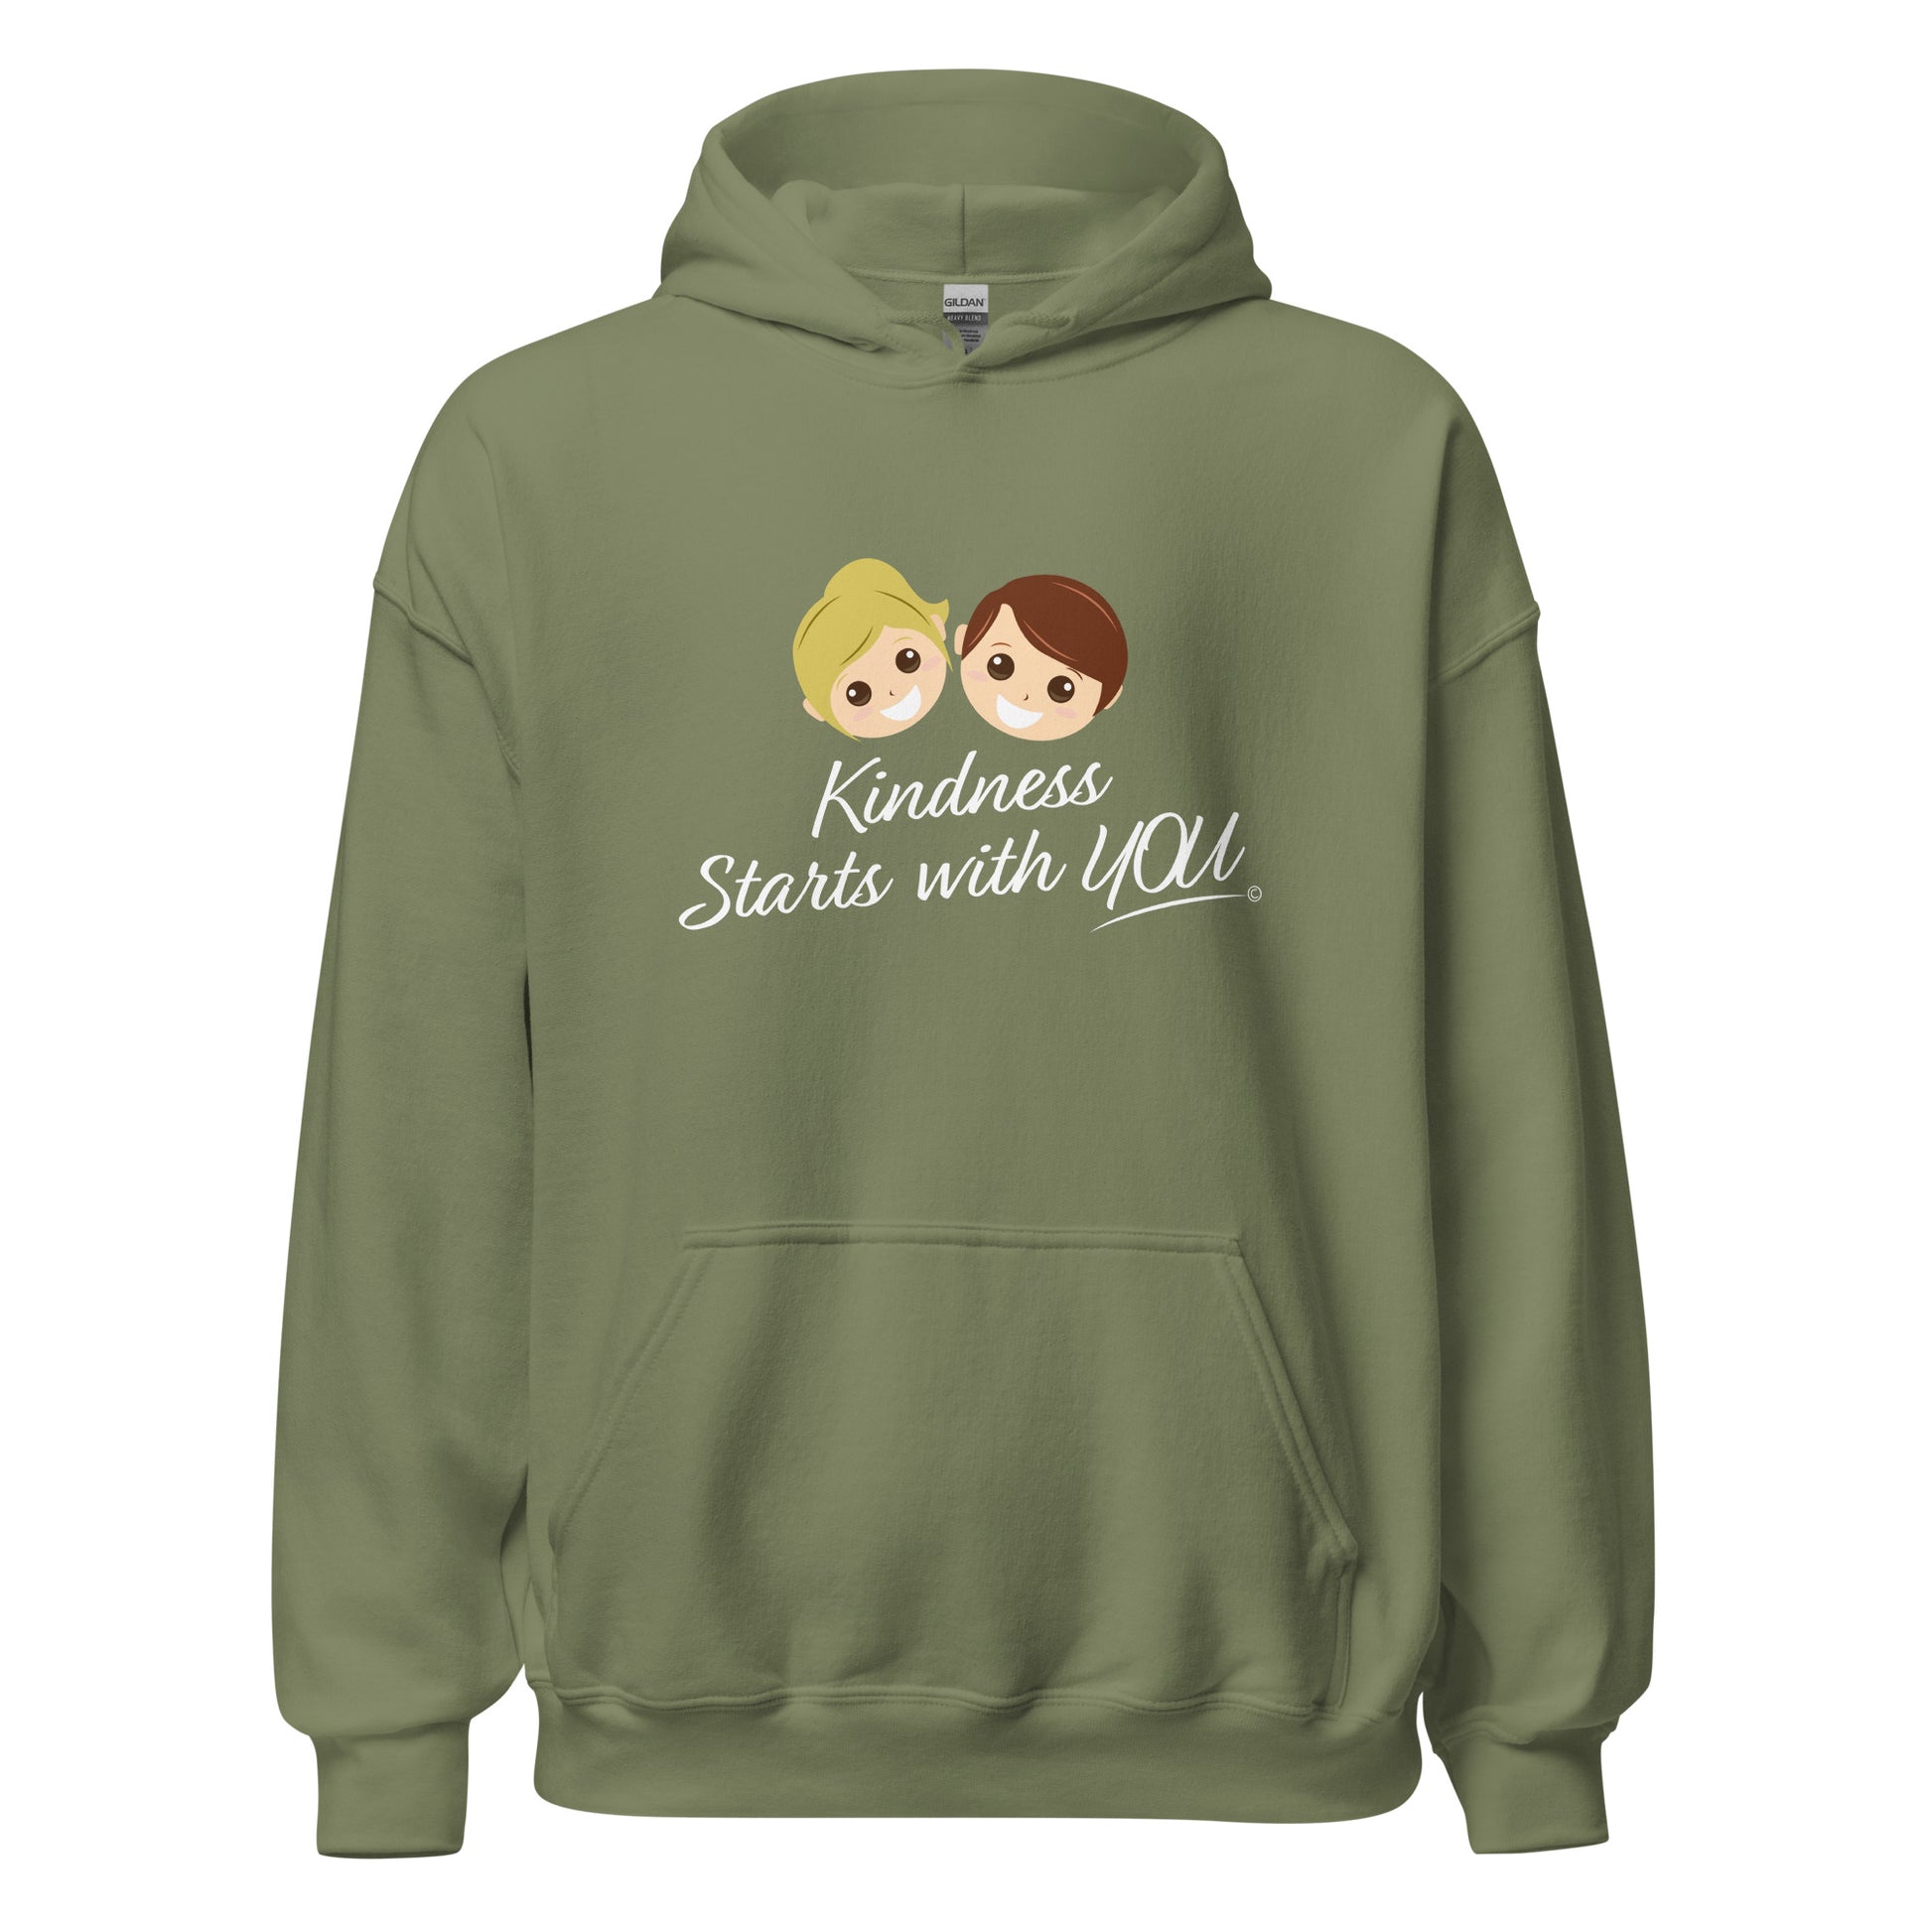 A cozy unisex hoodie in military green, featuring the uplifting quote 'Kindness Starts with You' in bold lettering.